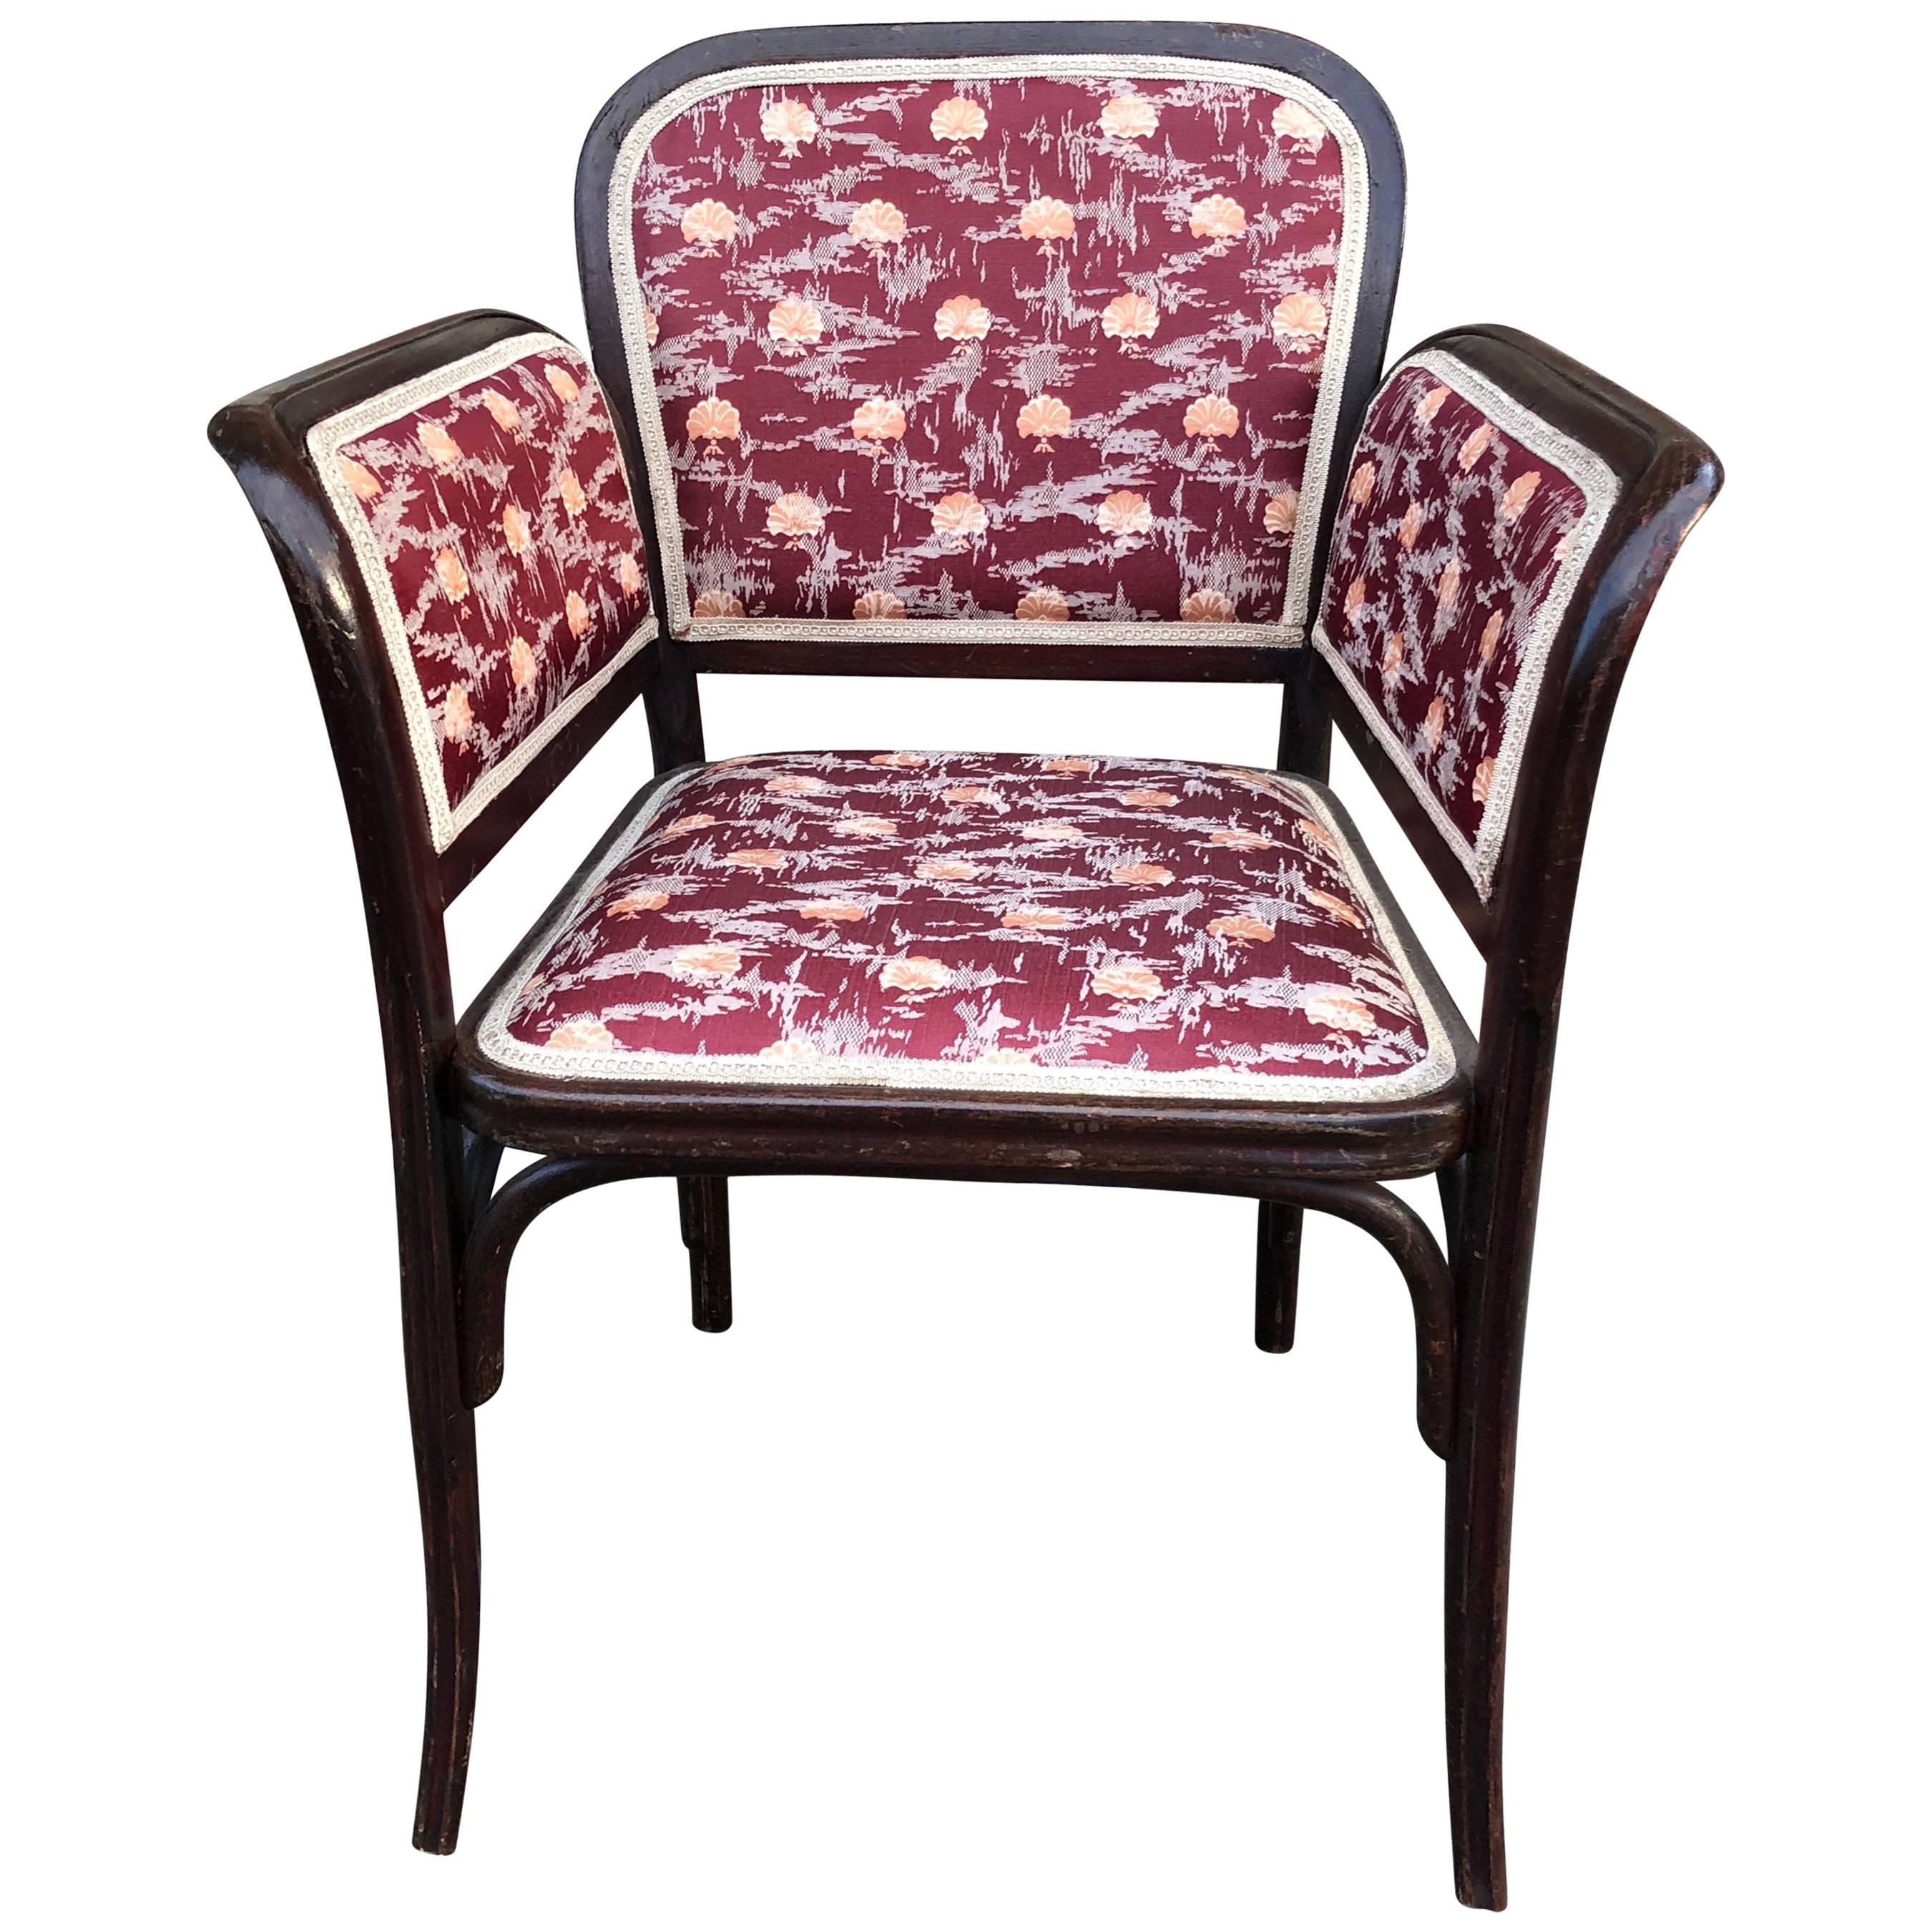 Thonet Secessionist Armchair Attributed to Otto Wagner